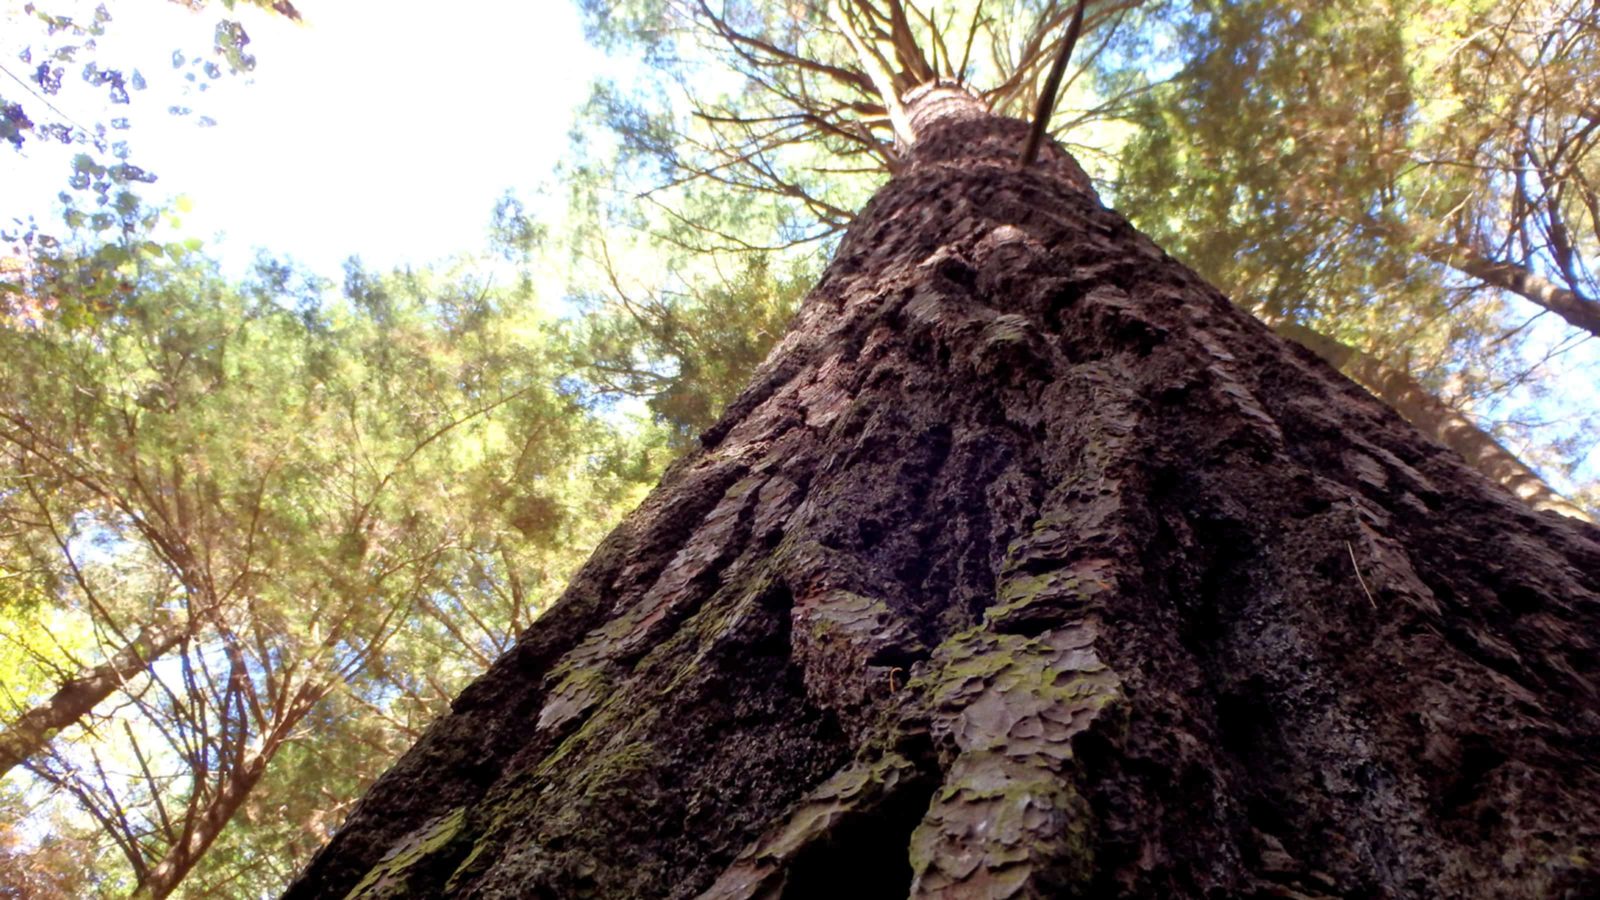 A White Pine stands more than 150 feet tall near the south end of Ice Glen in Stockbridge.